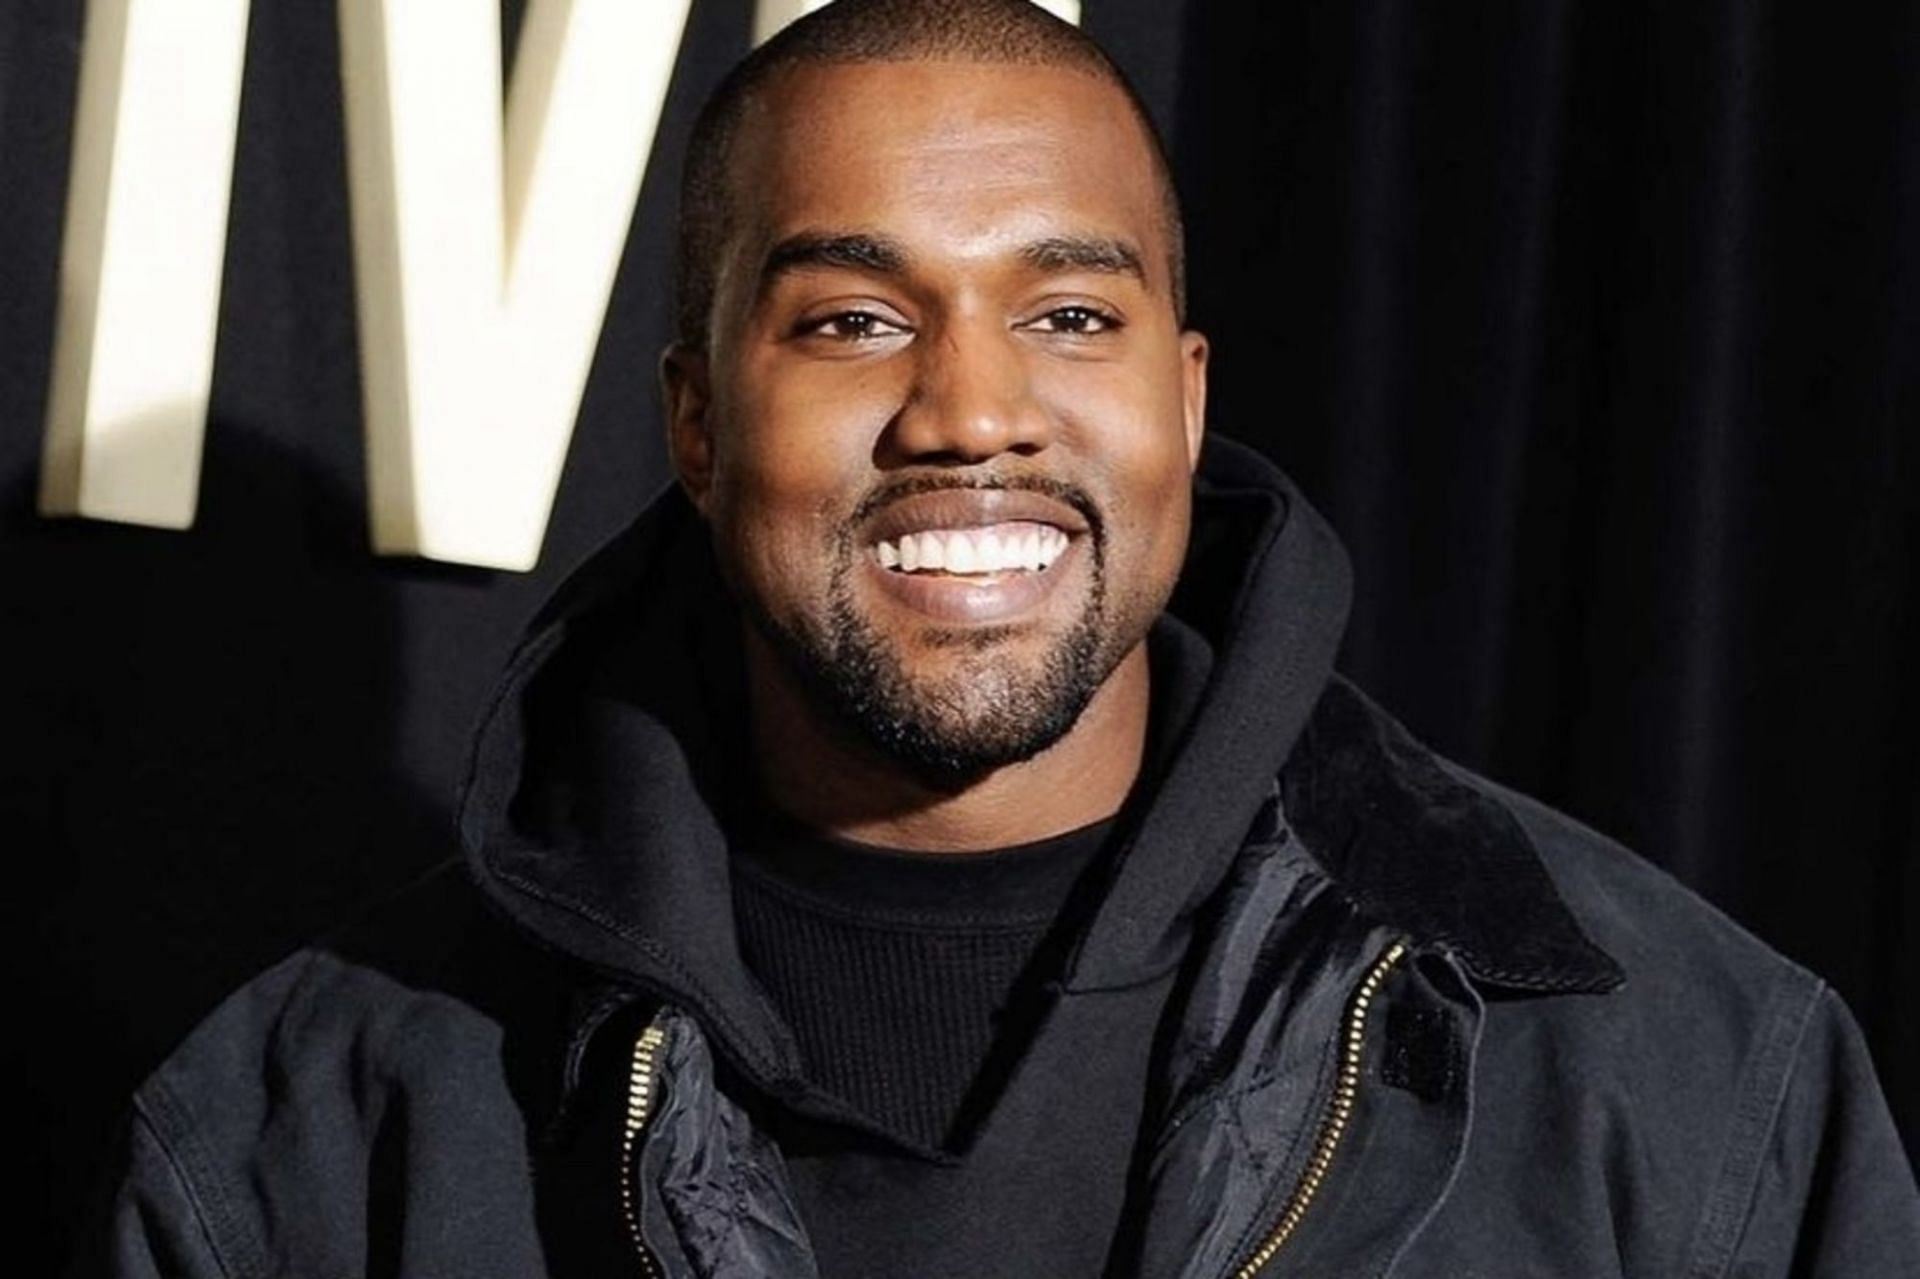 Kanye West calls out Sierra Canyon School in recent Instagram post (Image via Getty Images)